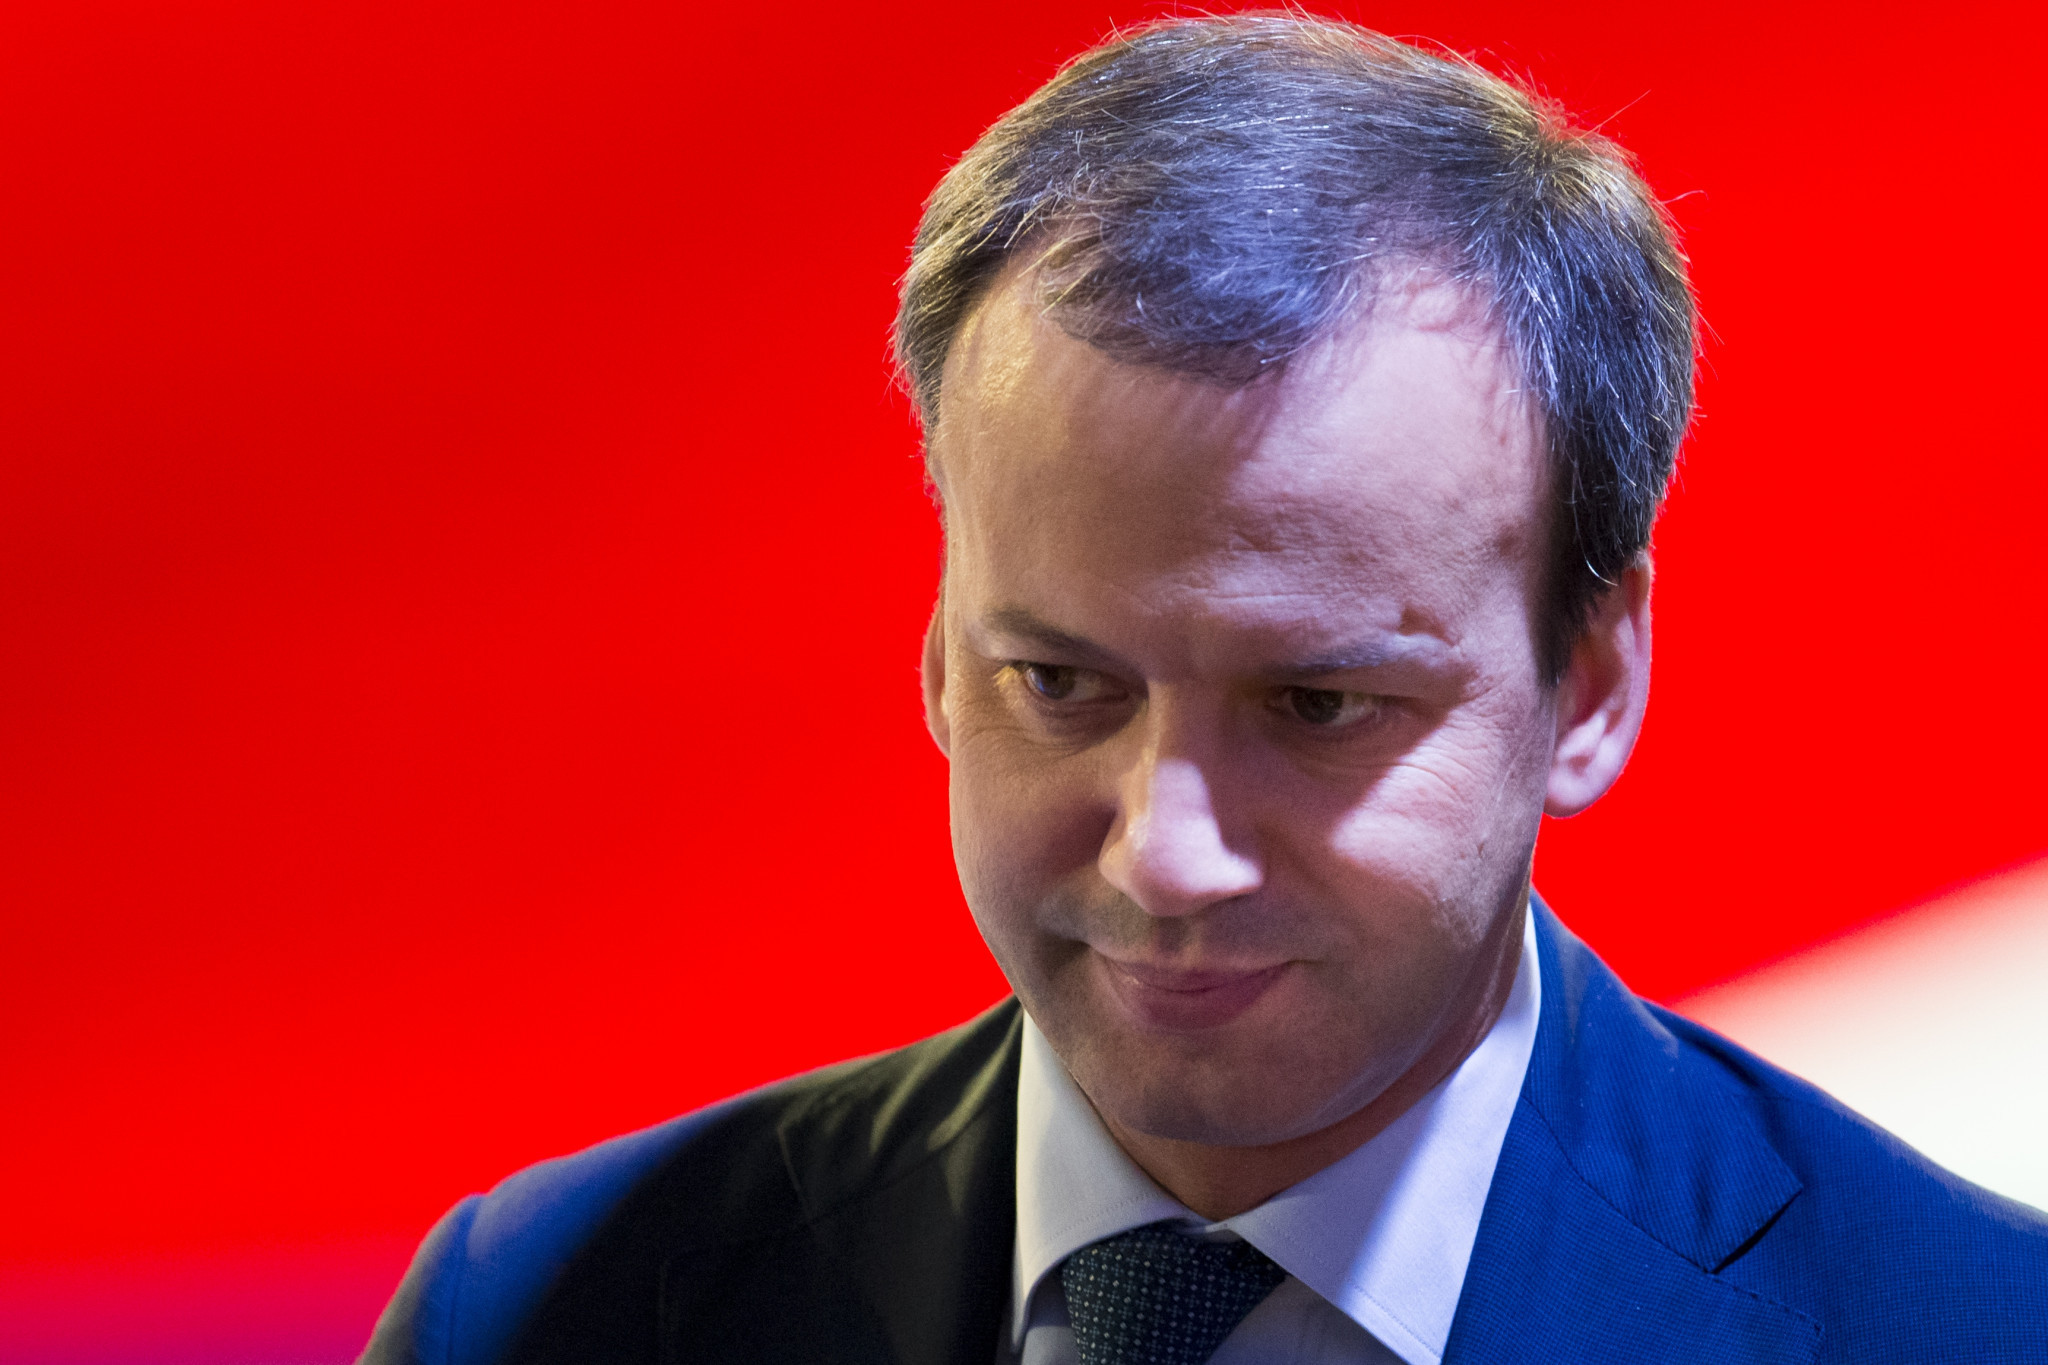  Arkady Dvorkovich has been appointed as the new President of the World Chess Federation ©Getty Images